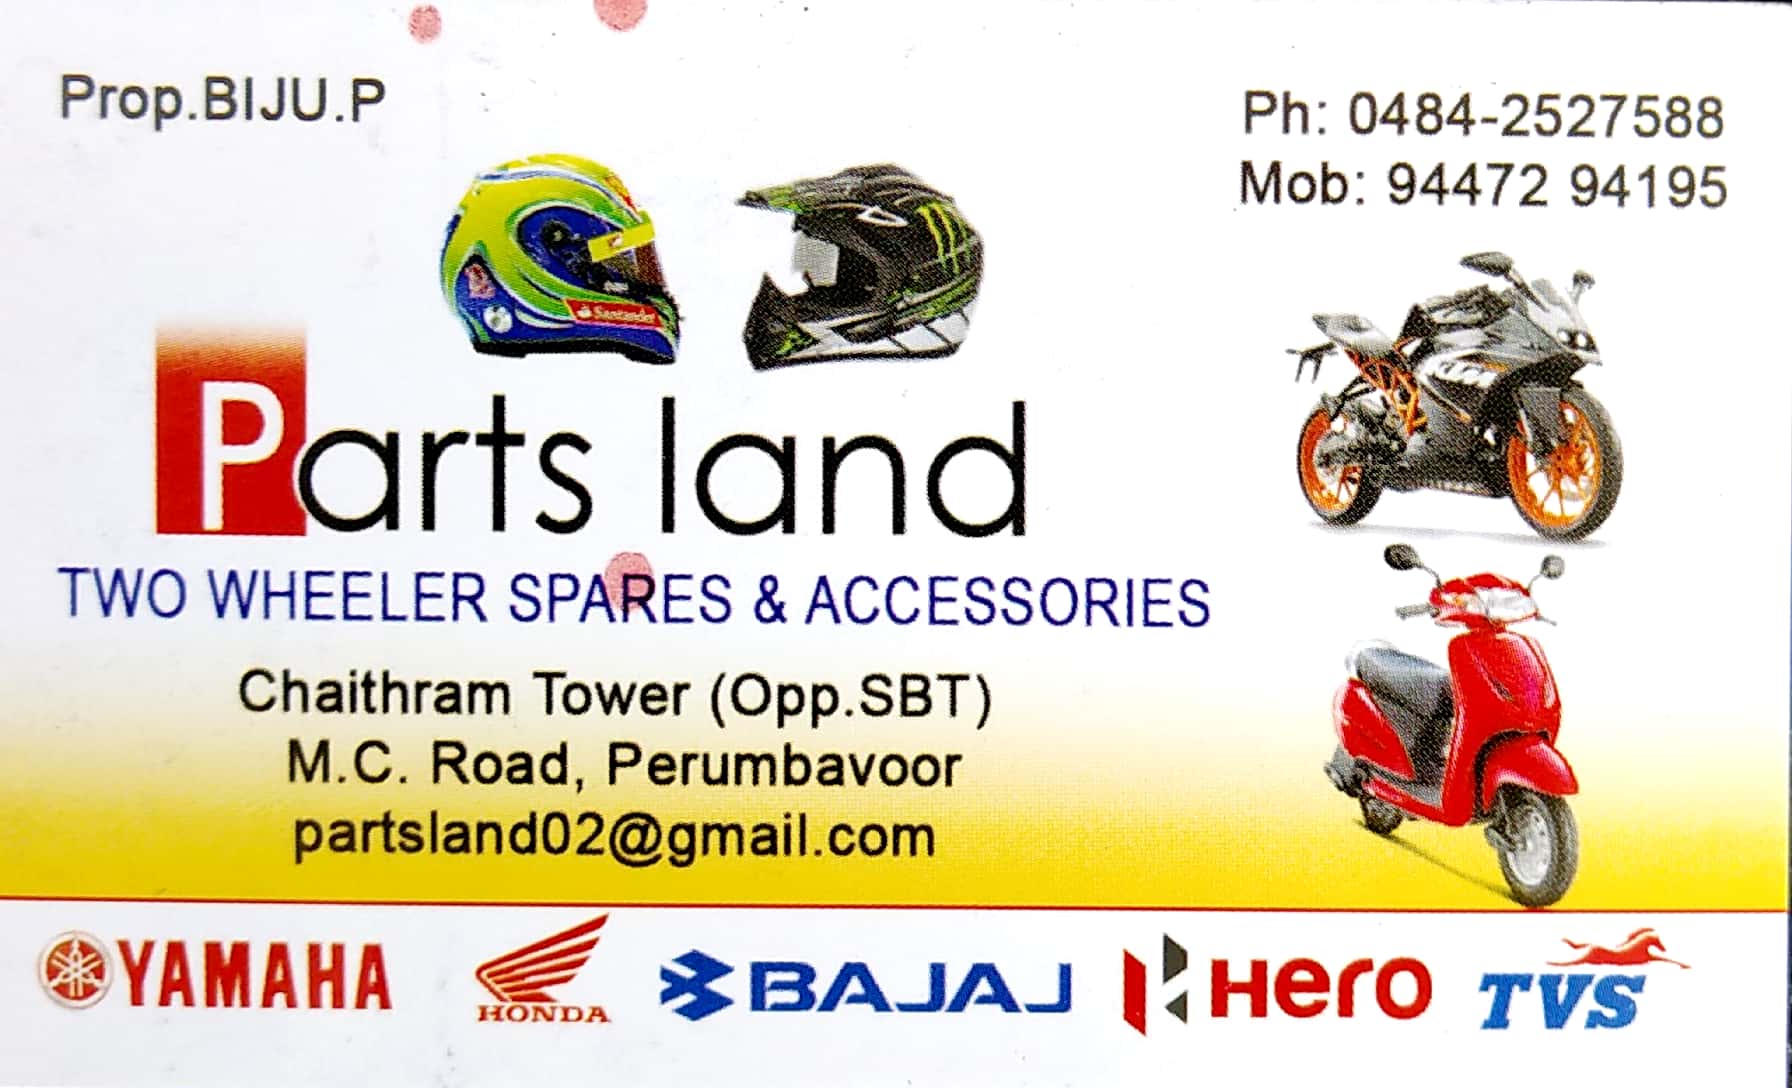 PARTS LAND, LUBES AND SPARE PARTS,  service in Perumbavoor, Ernakulam